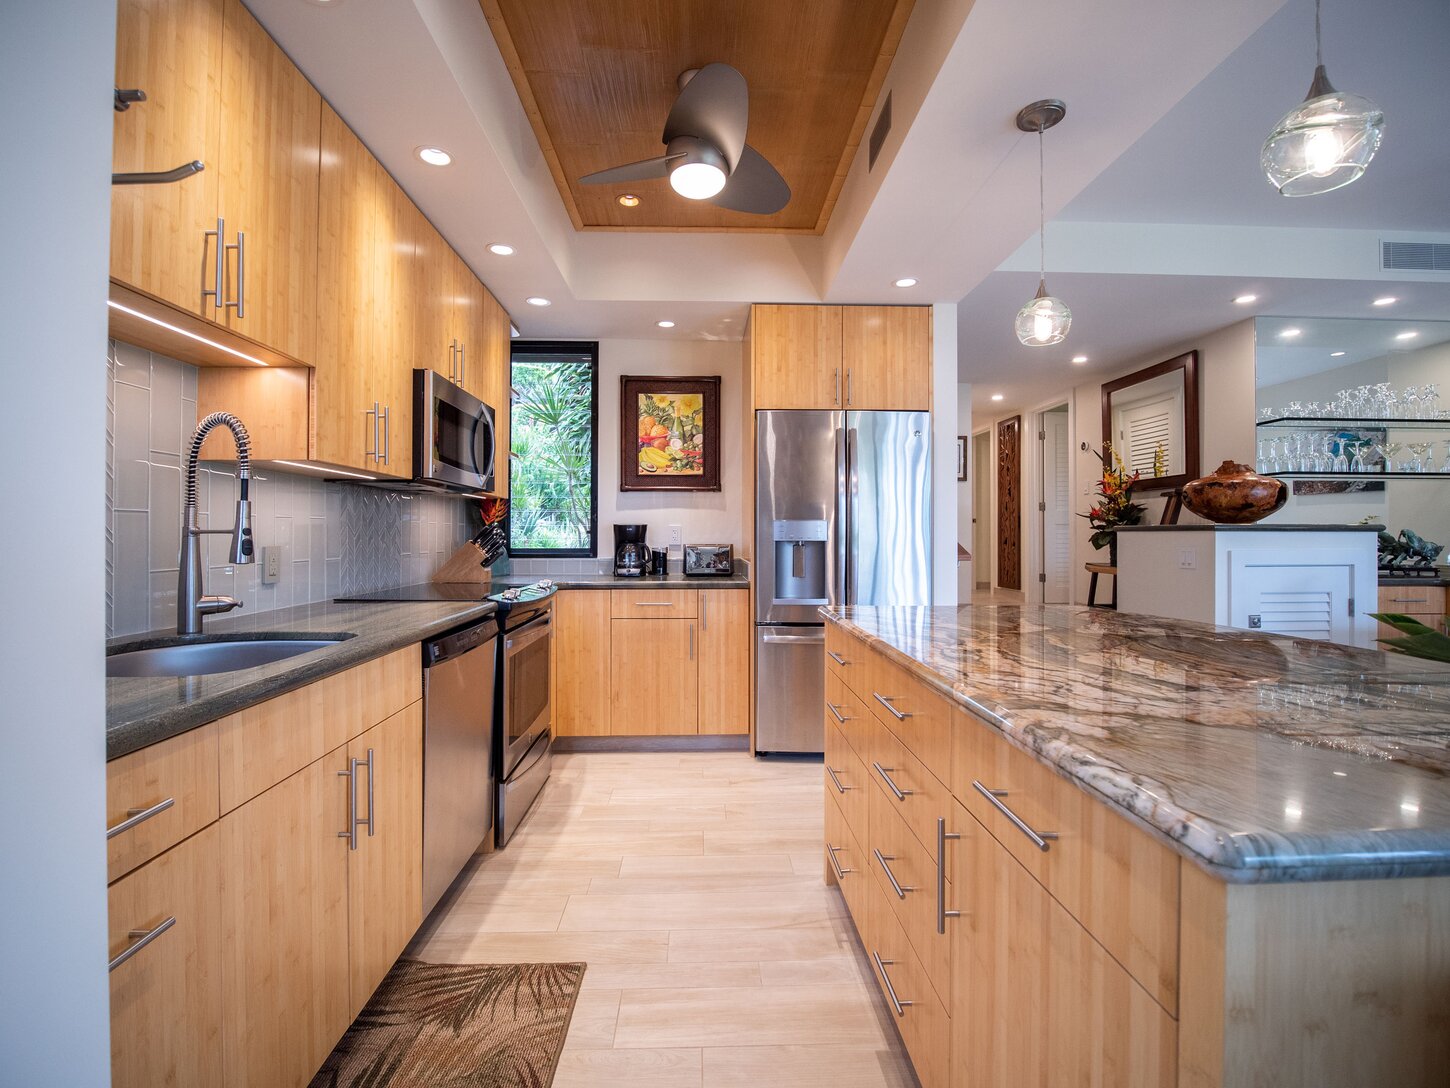 Kitchen features new stainless steel appliances and gourmet furnishings